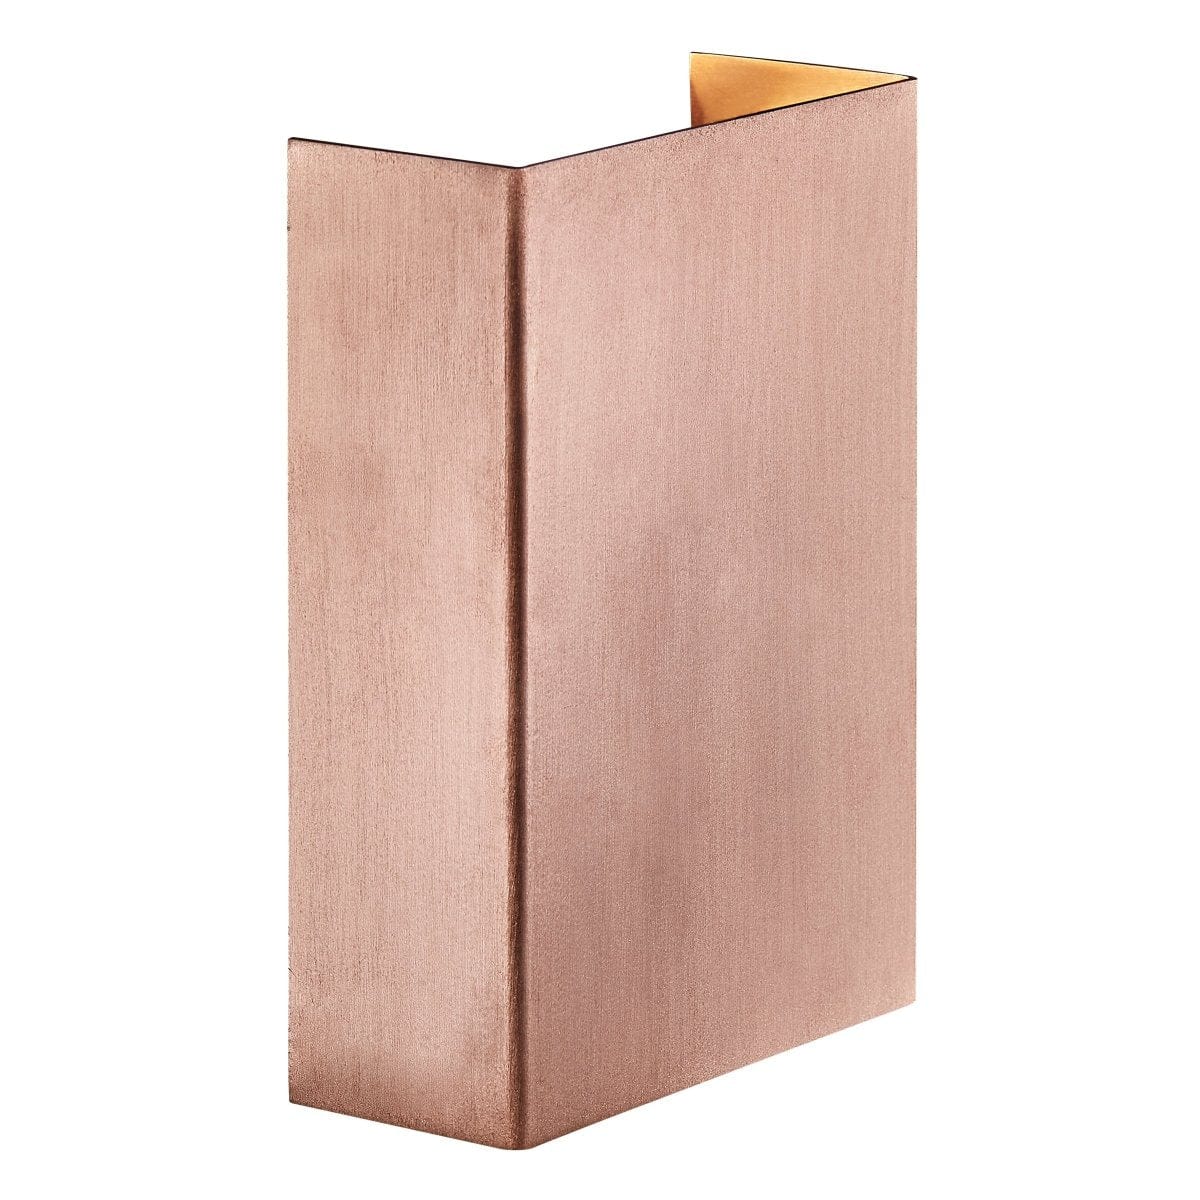 Nordlux Outdoor Lights Copper Fold 10 Outdoor Wall Light, various finishes